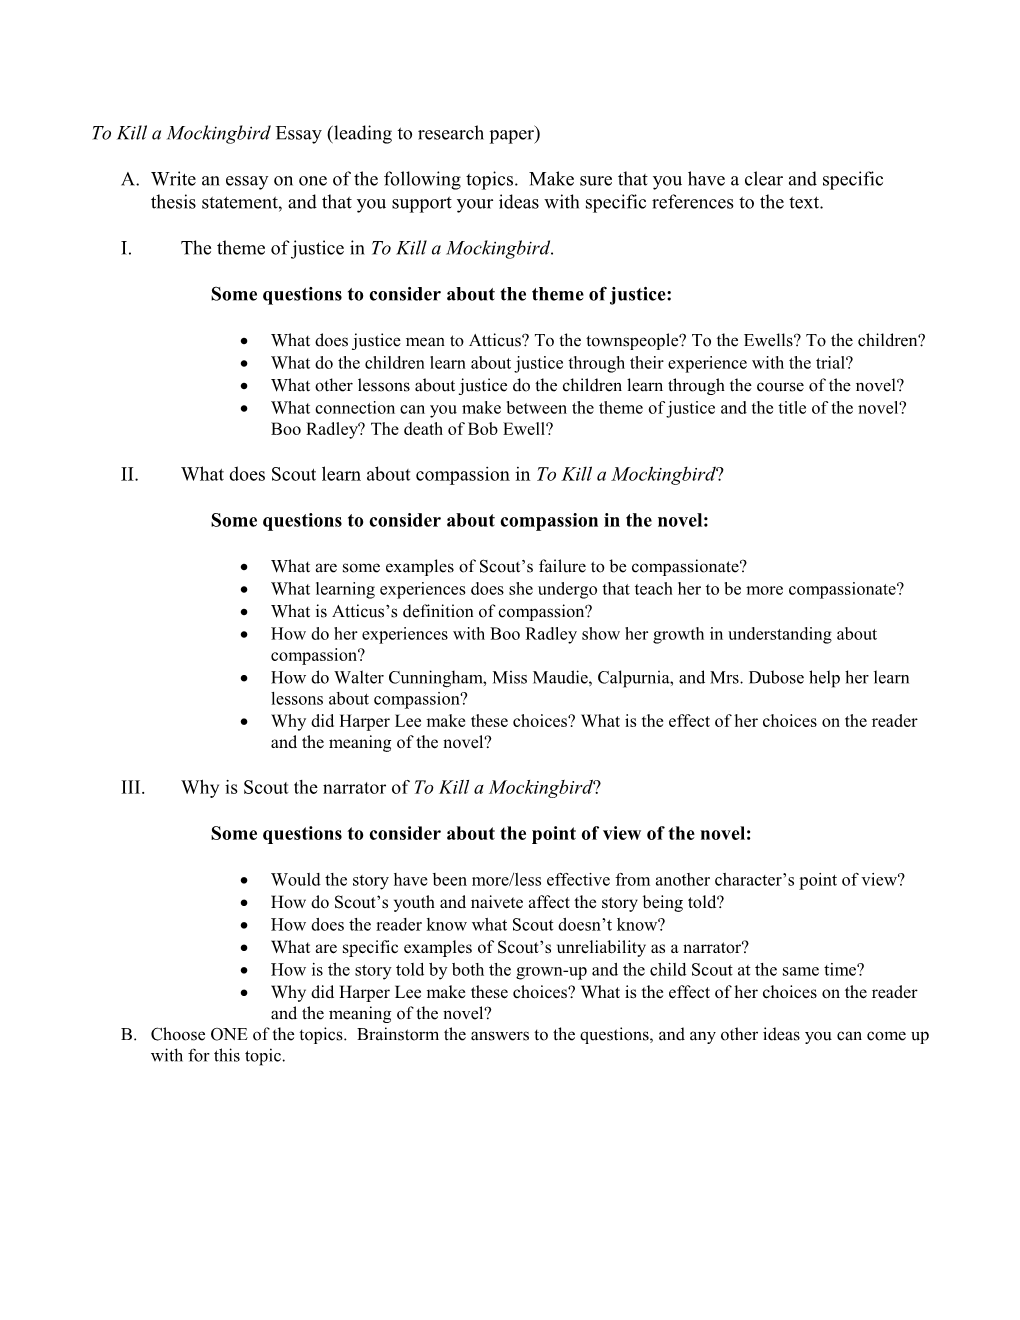 To Kill a Mockingbird Essay (Leading to Research Paper)